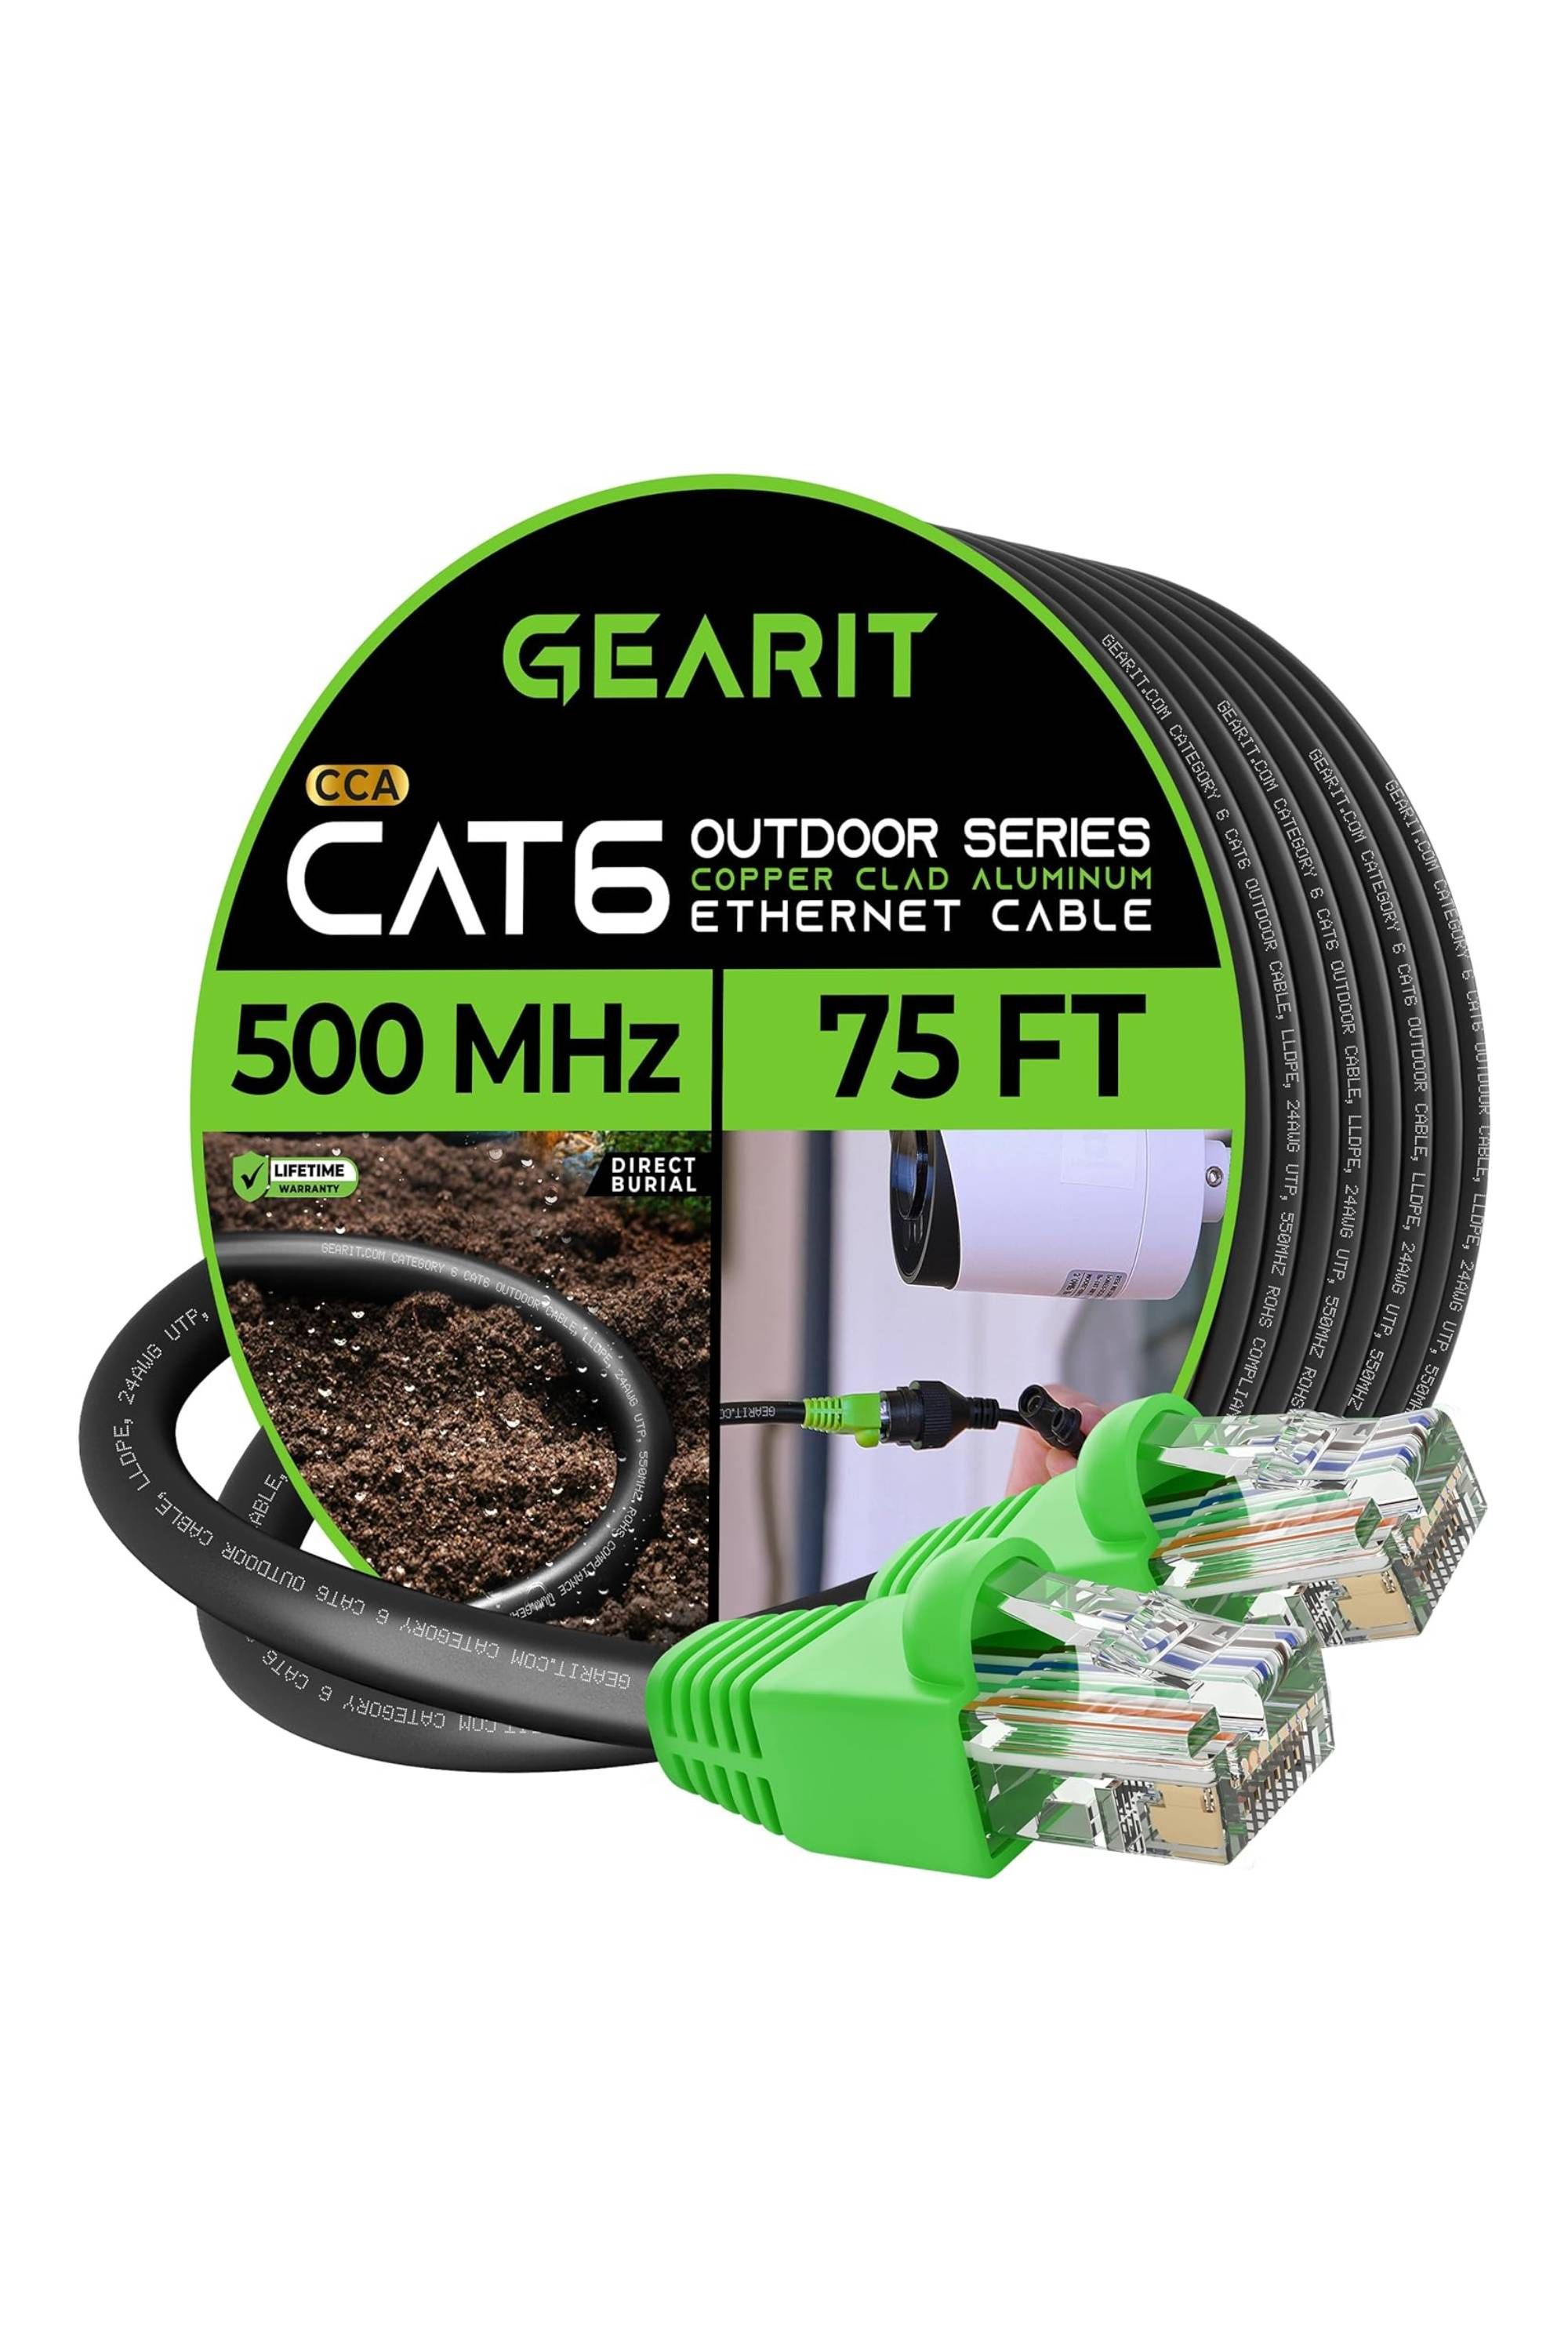 GearIT 75ft RJ45 Cat 6 Outdoor Ethernet Cable